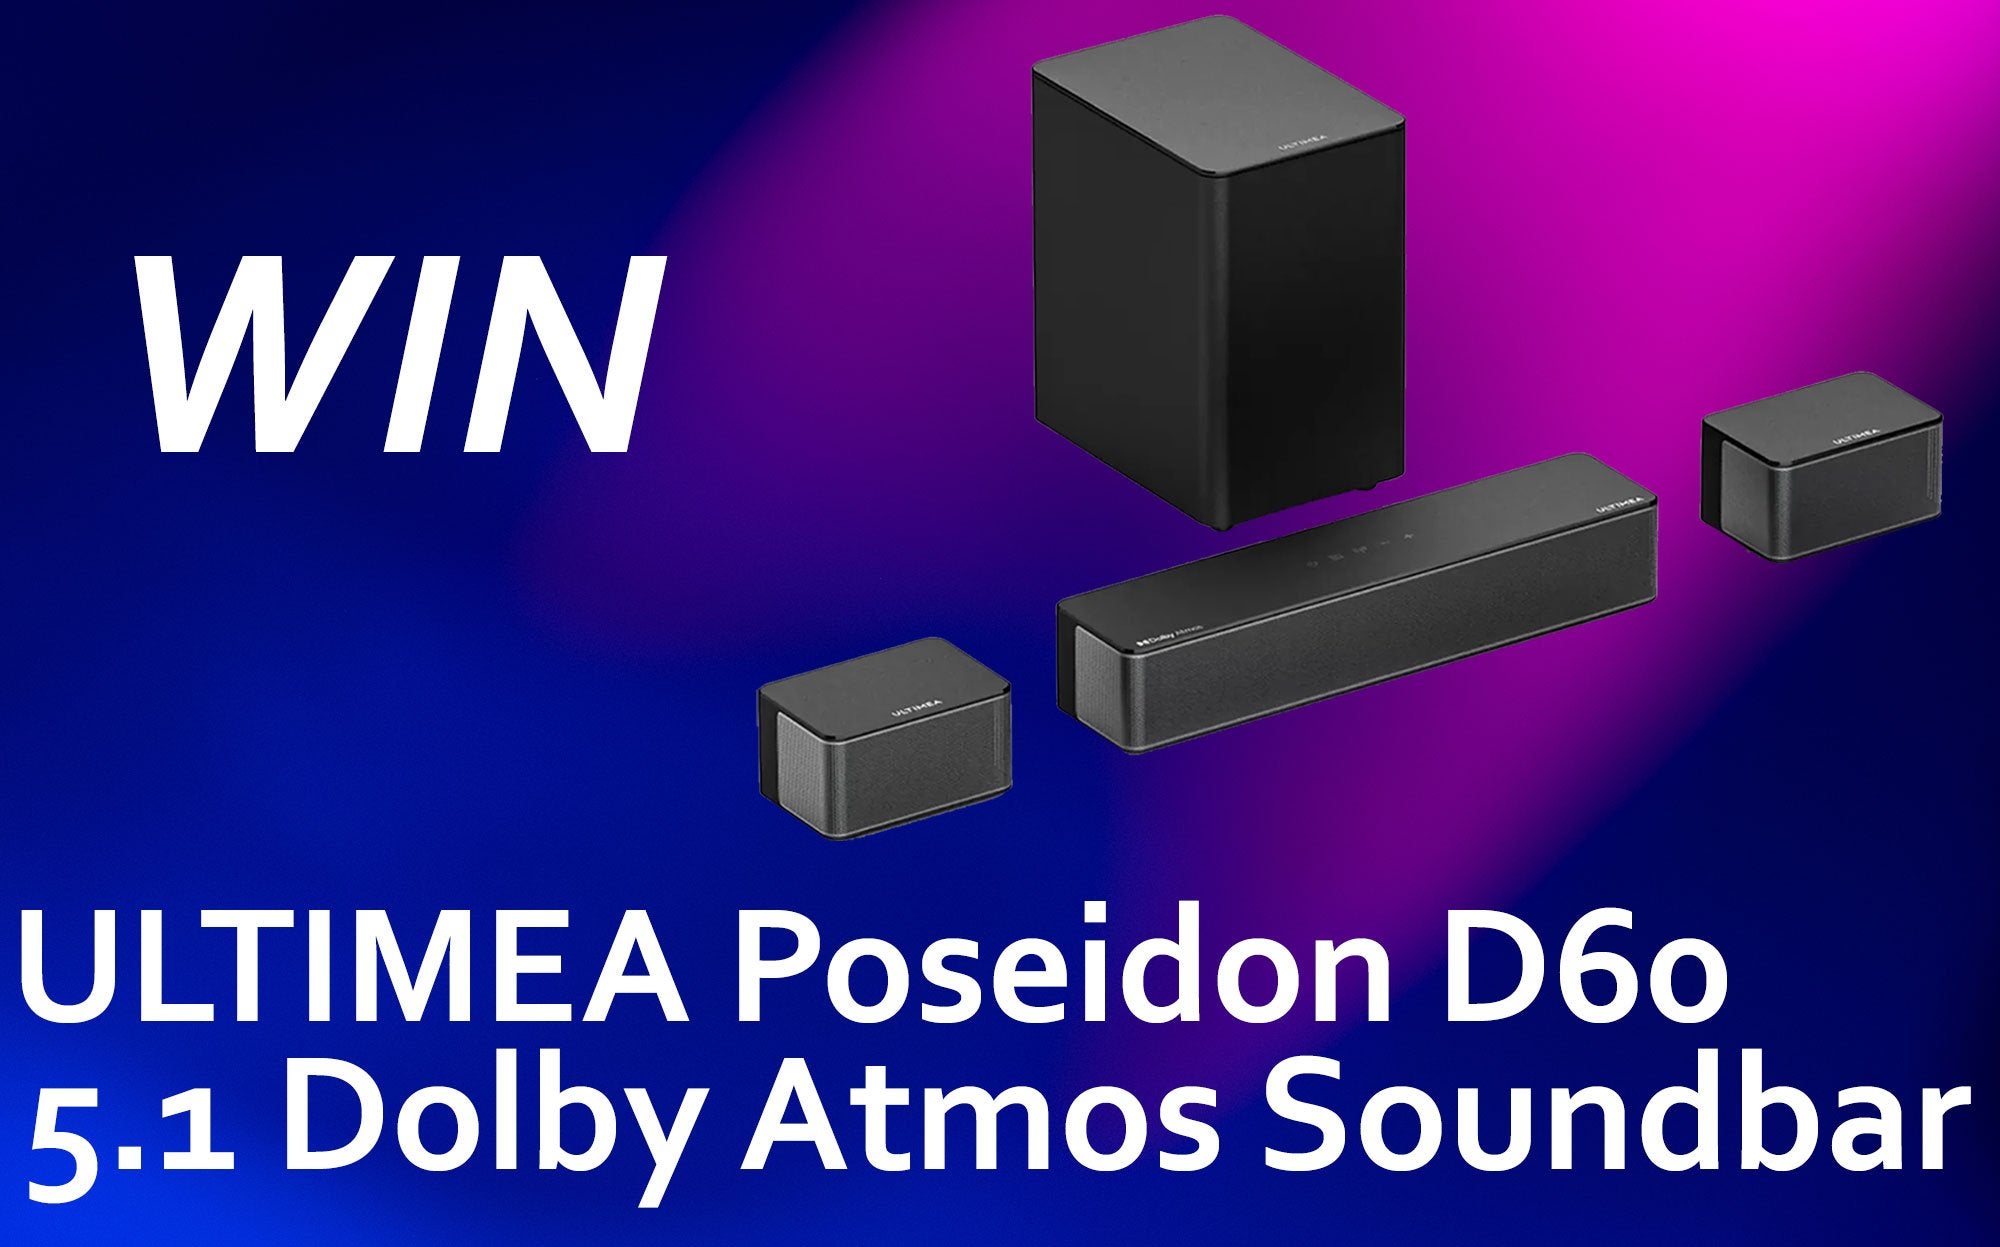 Enter To Win an ULTIMEA Poseidon D60 5.1 Dolby Atmos Surround